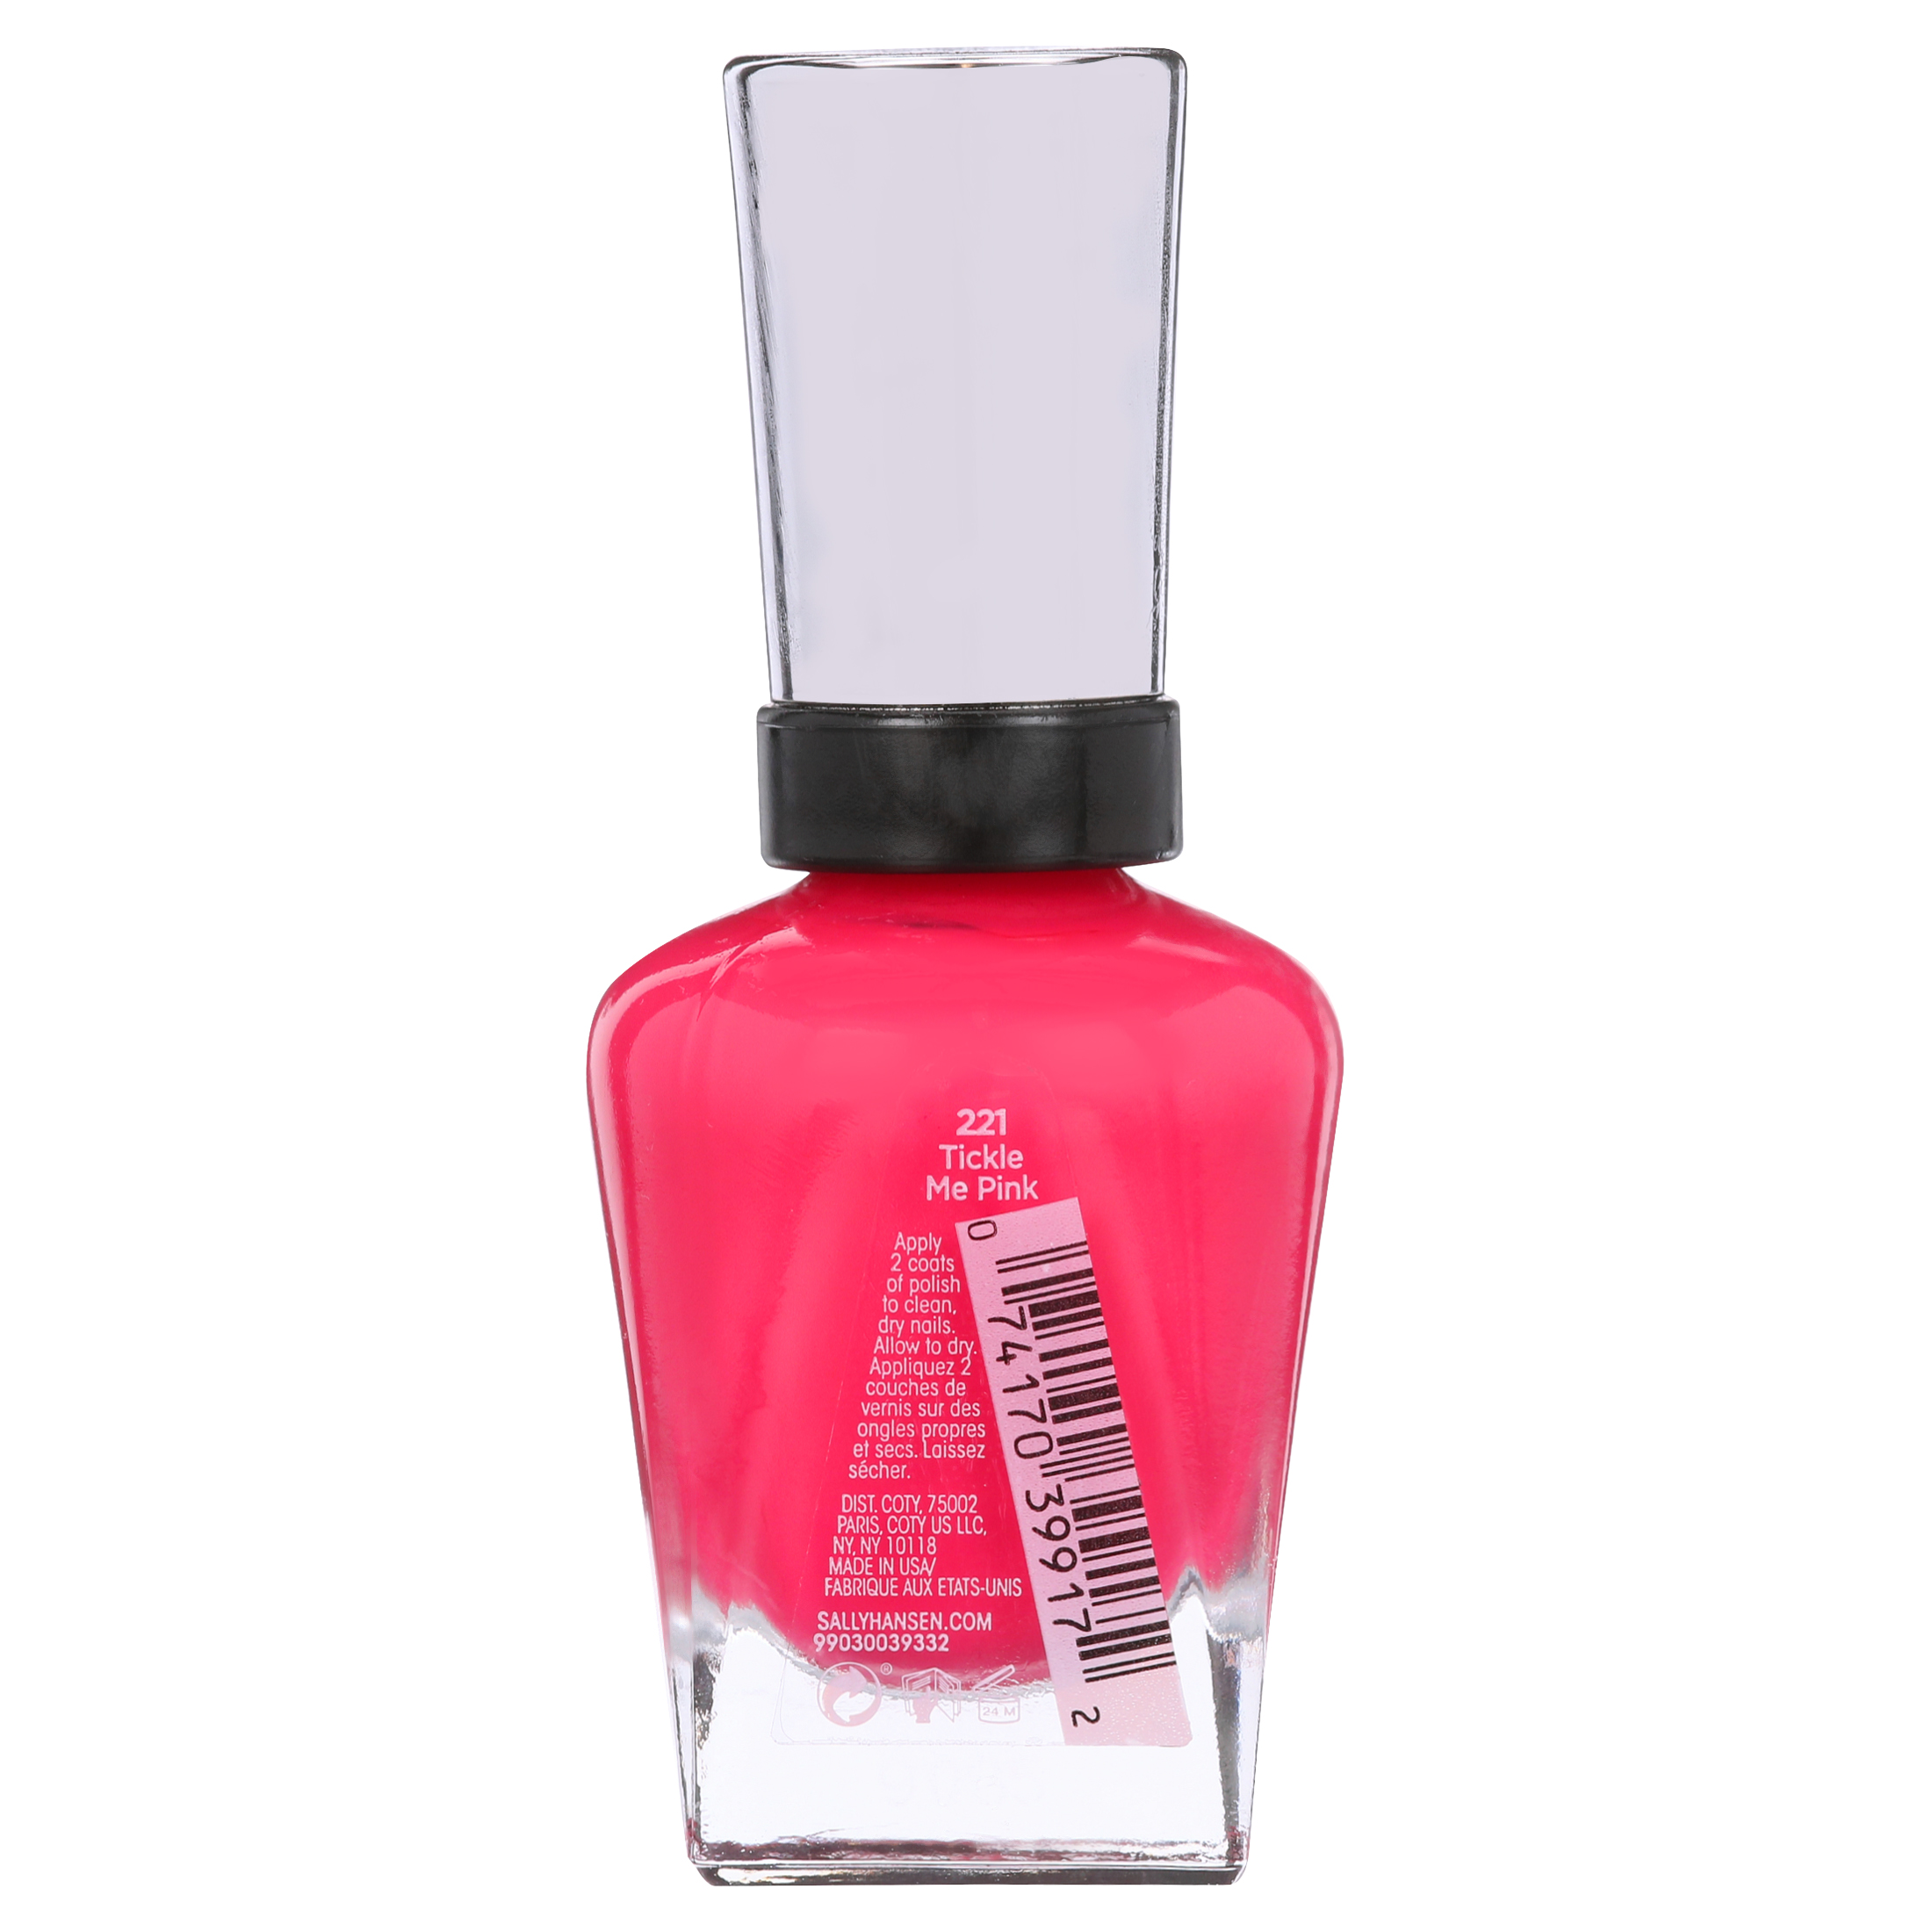 Sally Hansen Complete Salon Manicure Nail Color, Tickle Me Pink - image 11 of 15